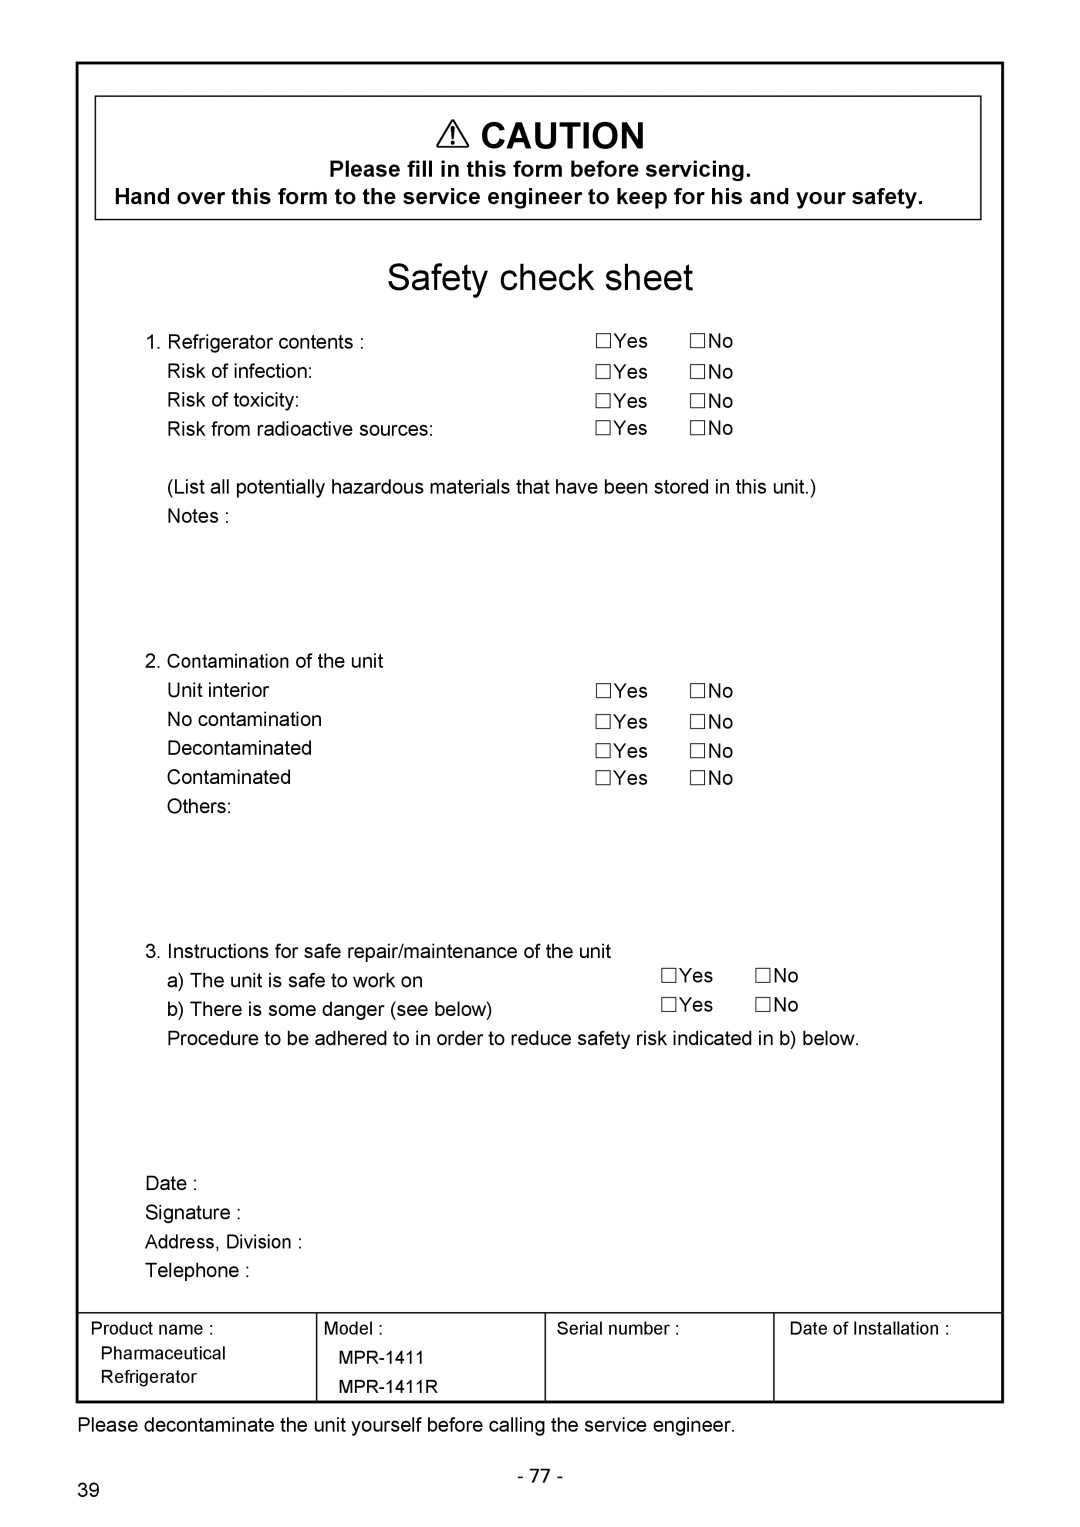 Sanyo MPR-1411R instruction manual Safety check sheet, Please fill in this form before servicing 